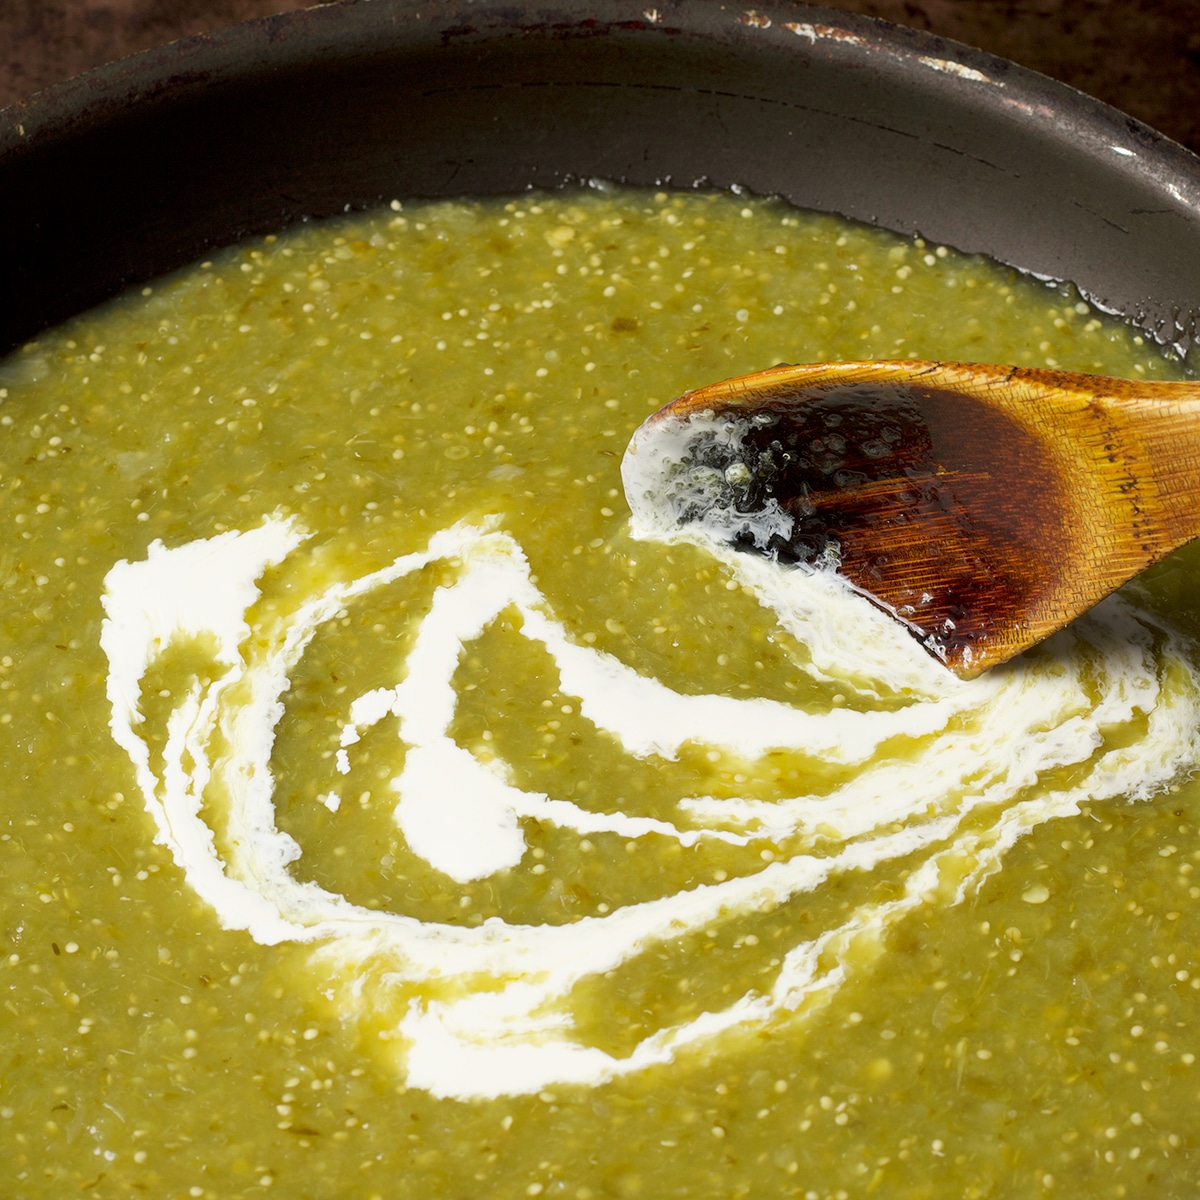 Using a wooden spoon to mix heavy cream into salsa verde.